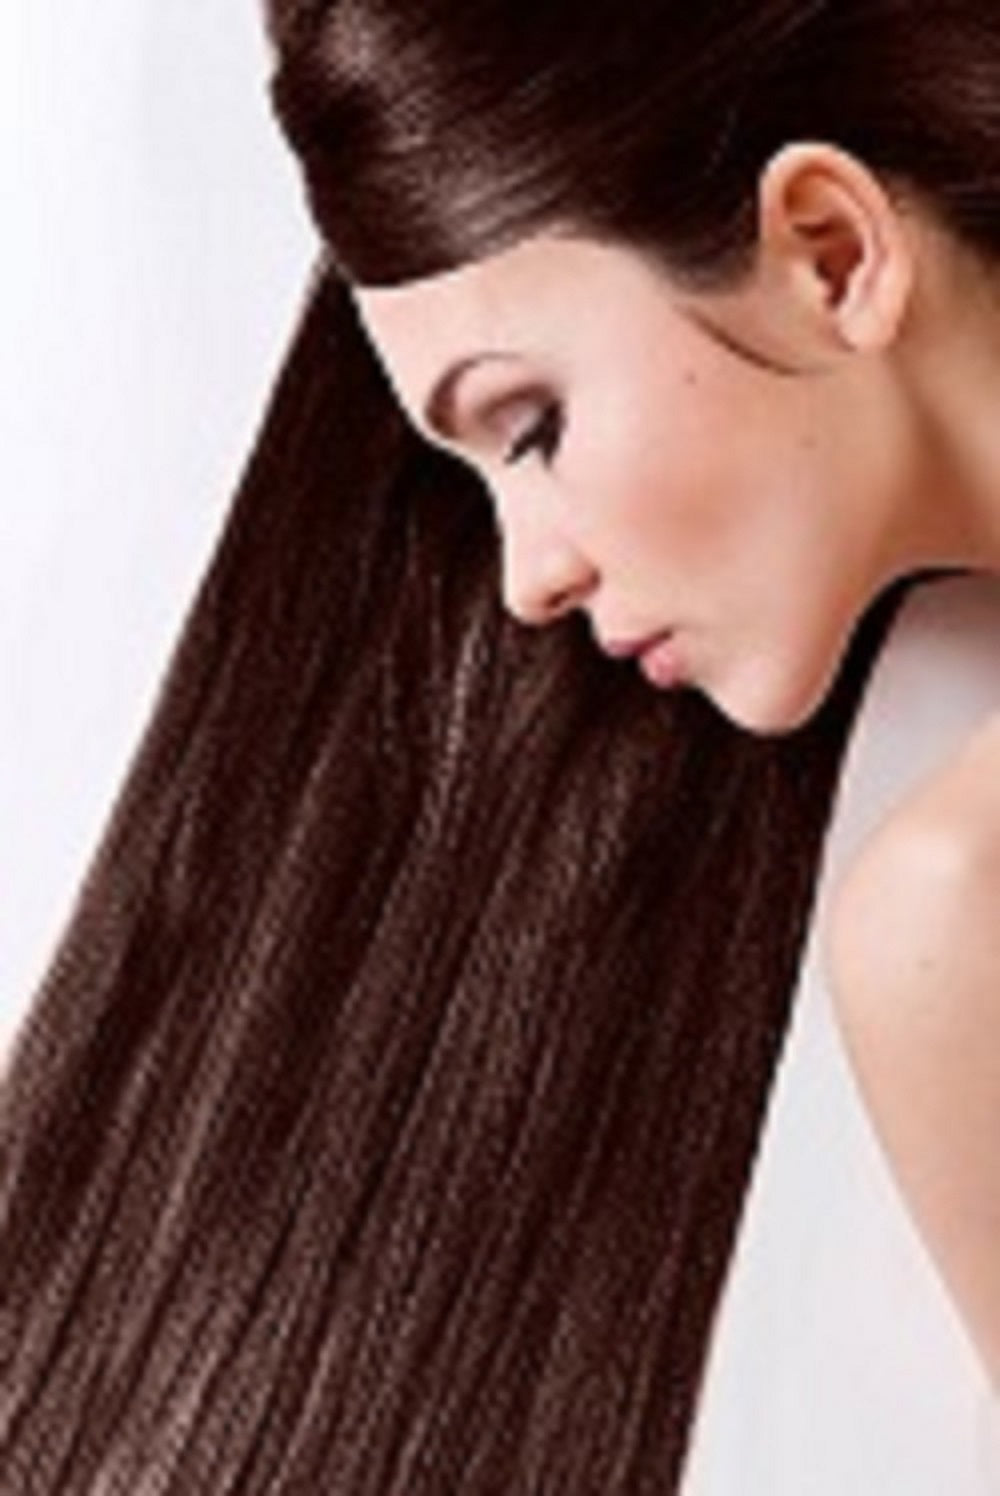 Sanotint Light Brown hair dye without ammonia. When you choose sanotint hair products, one can be assured this product will protect and keep your hair healthy